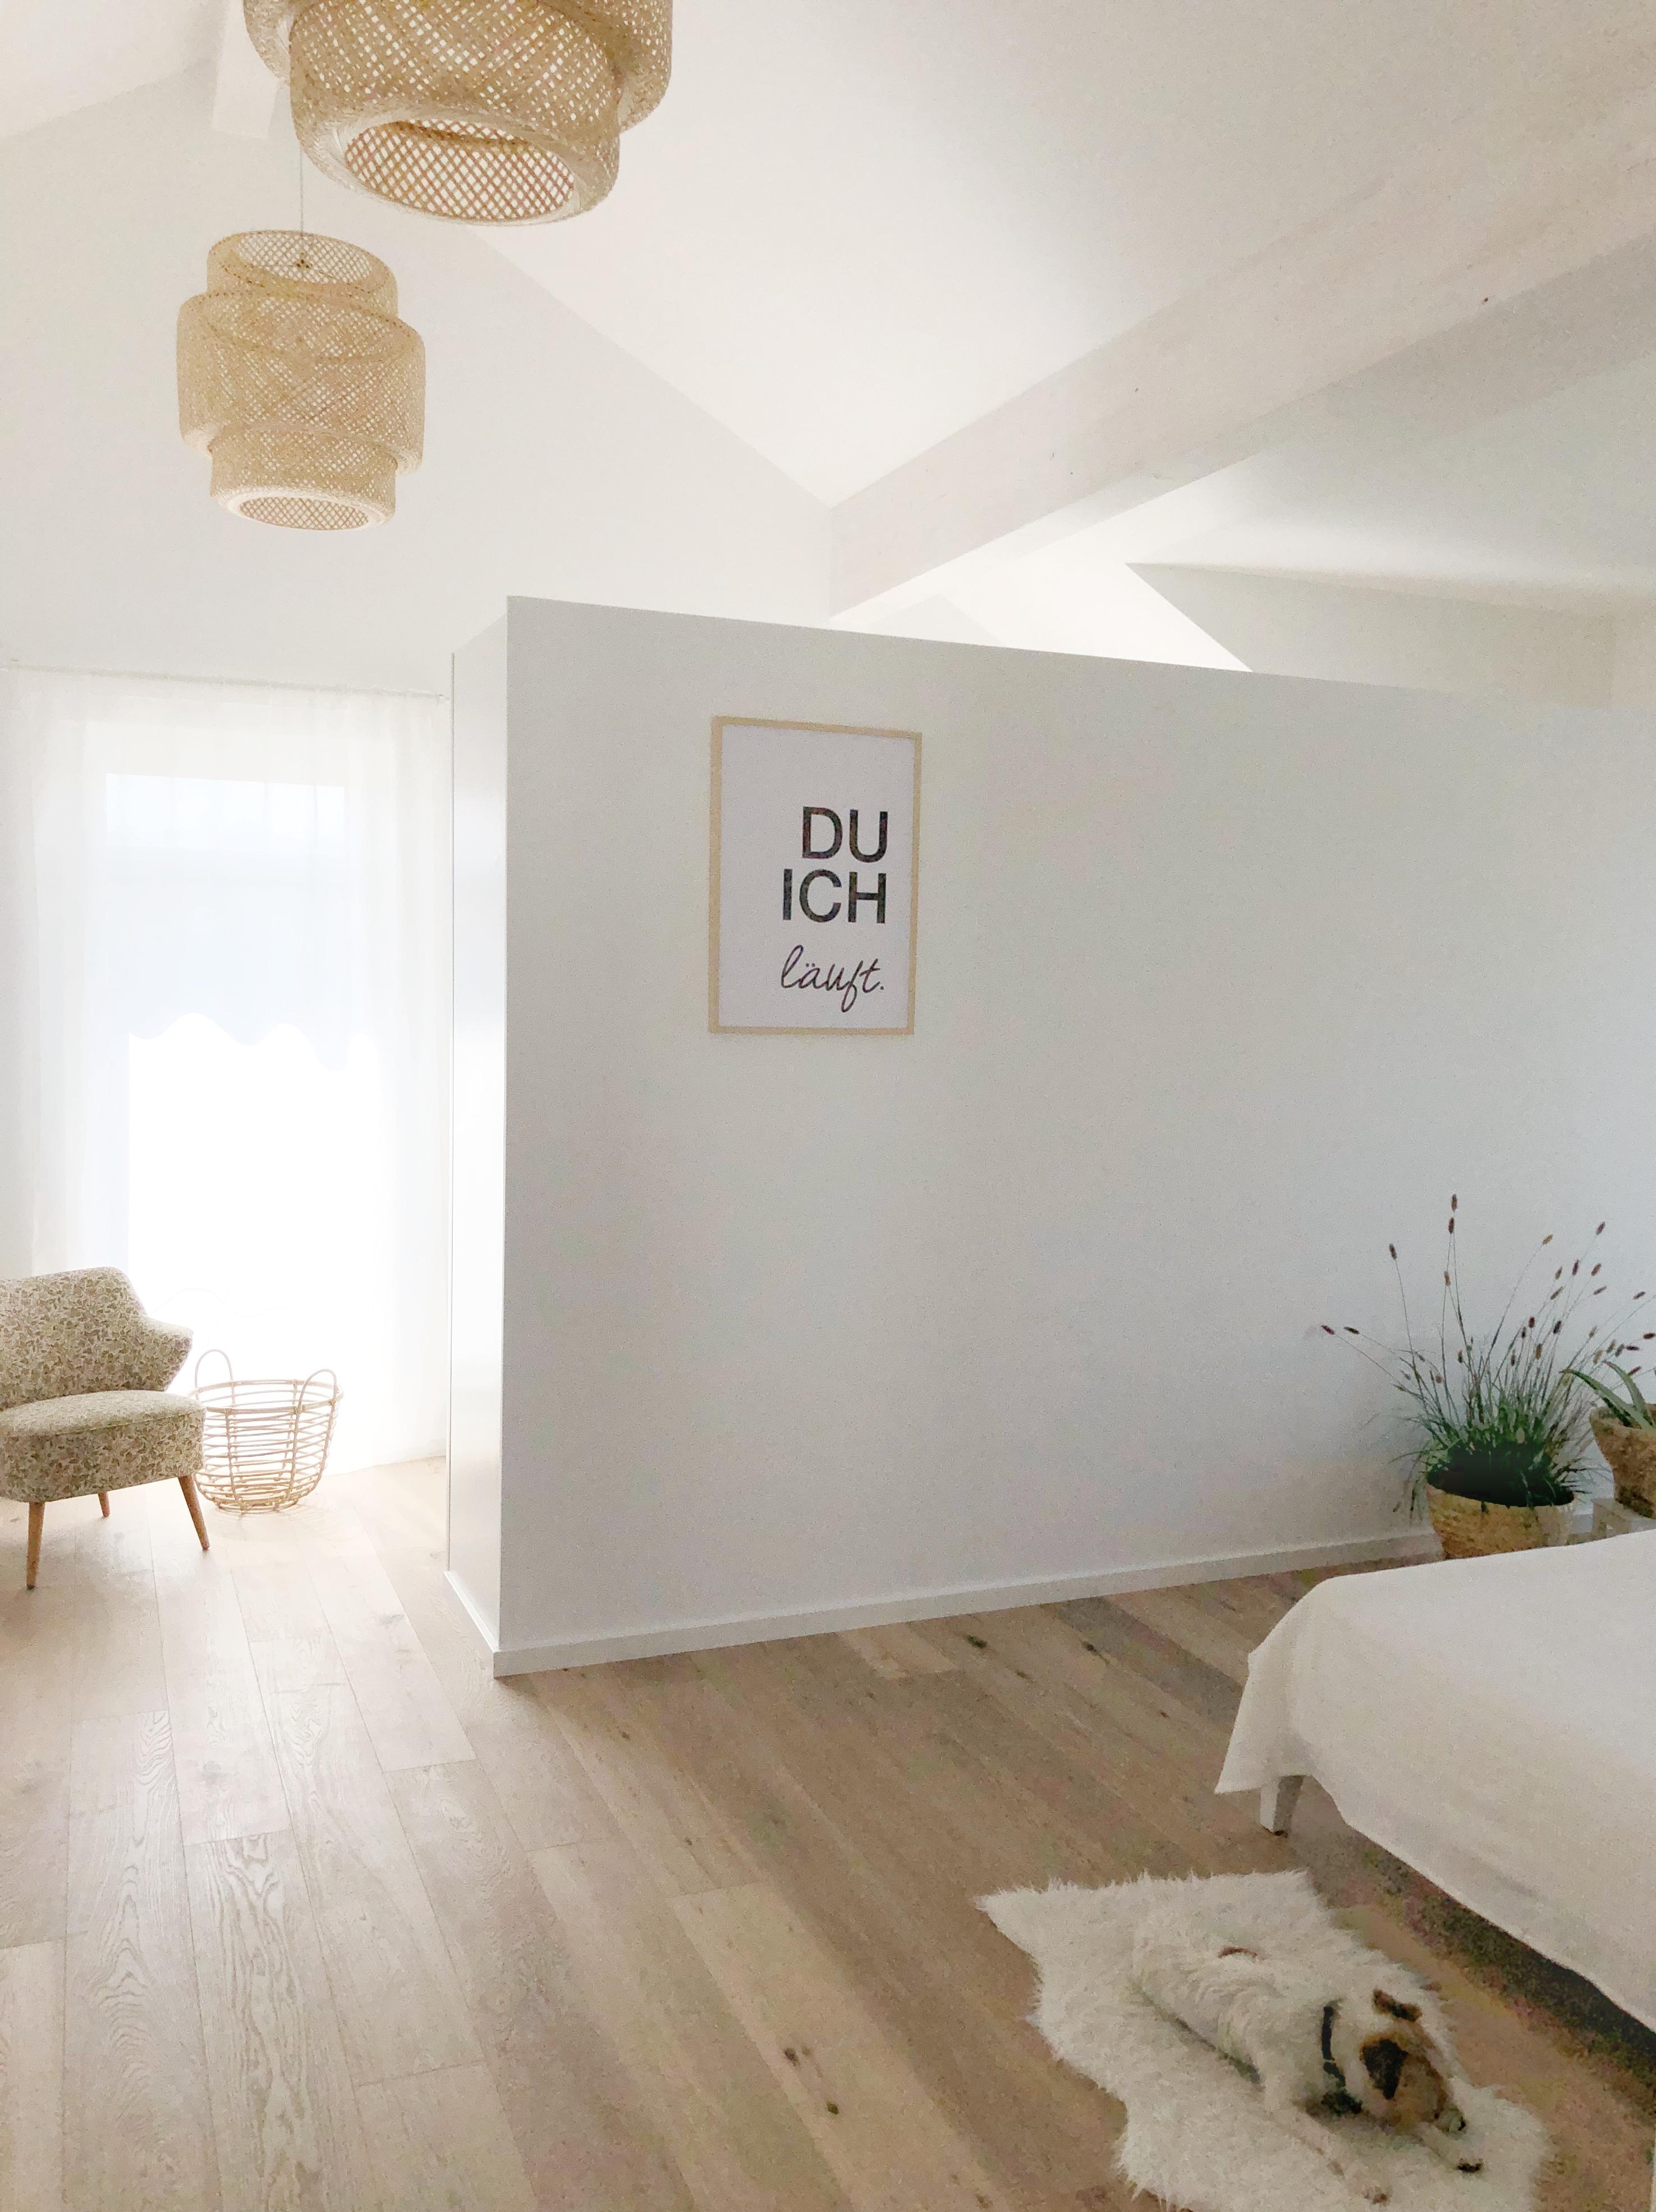 Schlafzimmer
#bedroom#whitehome#pure